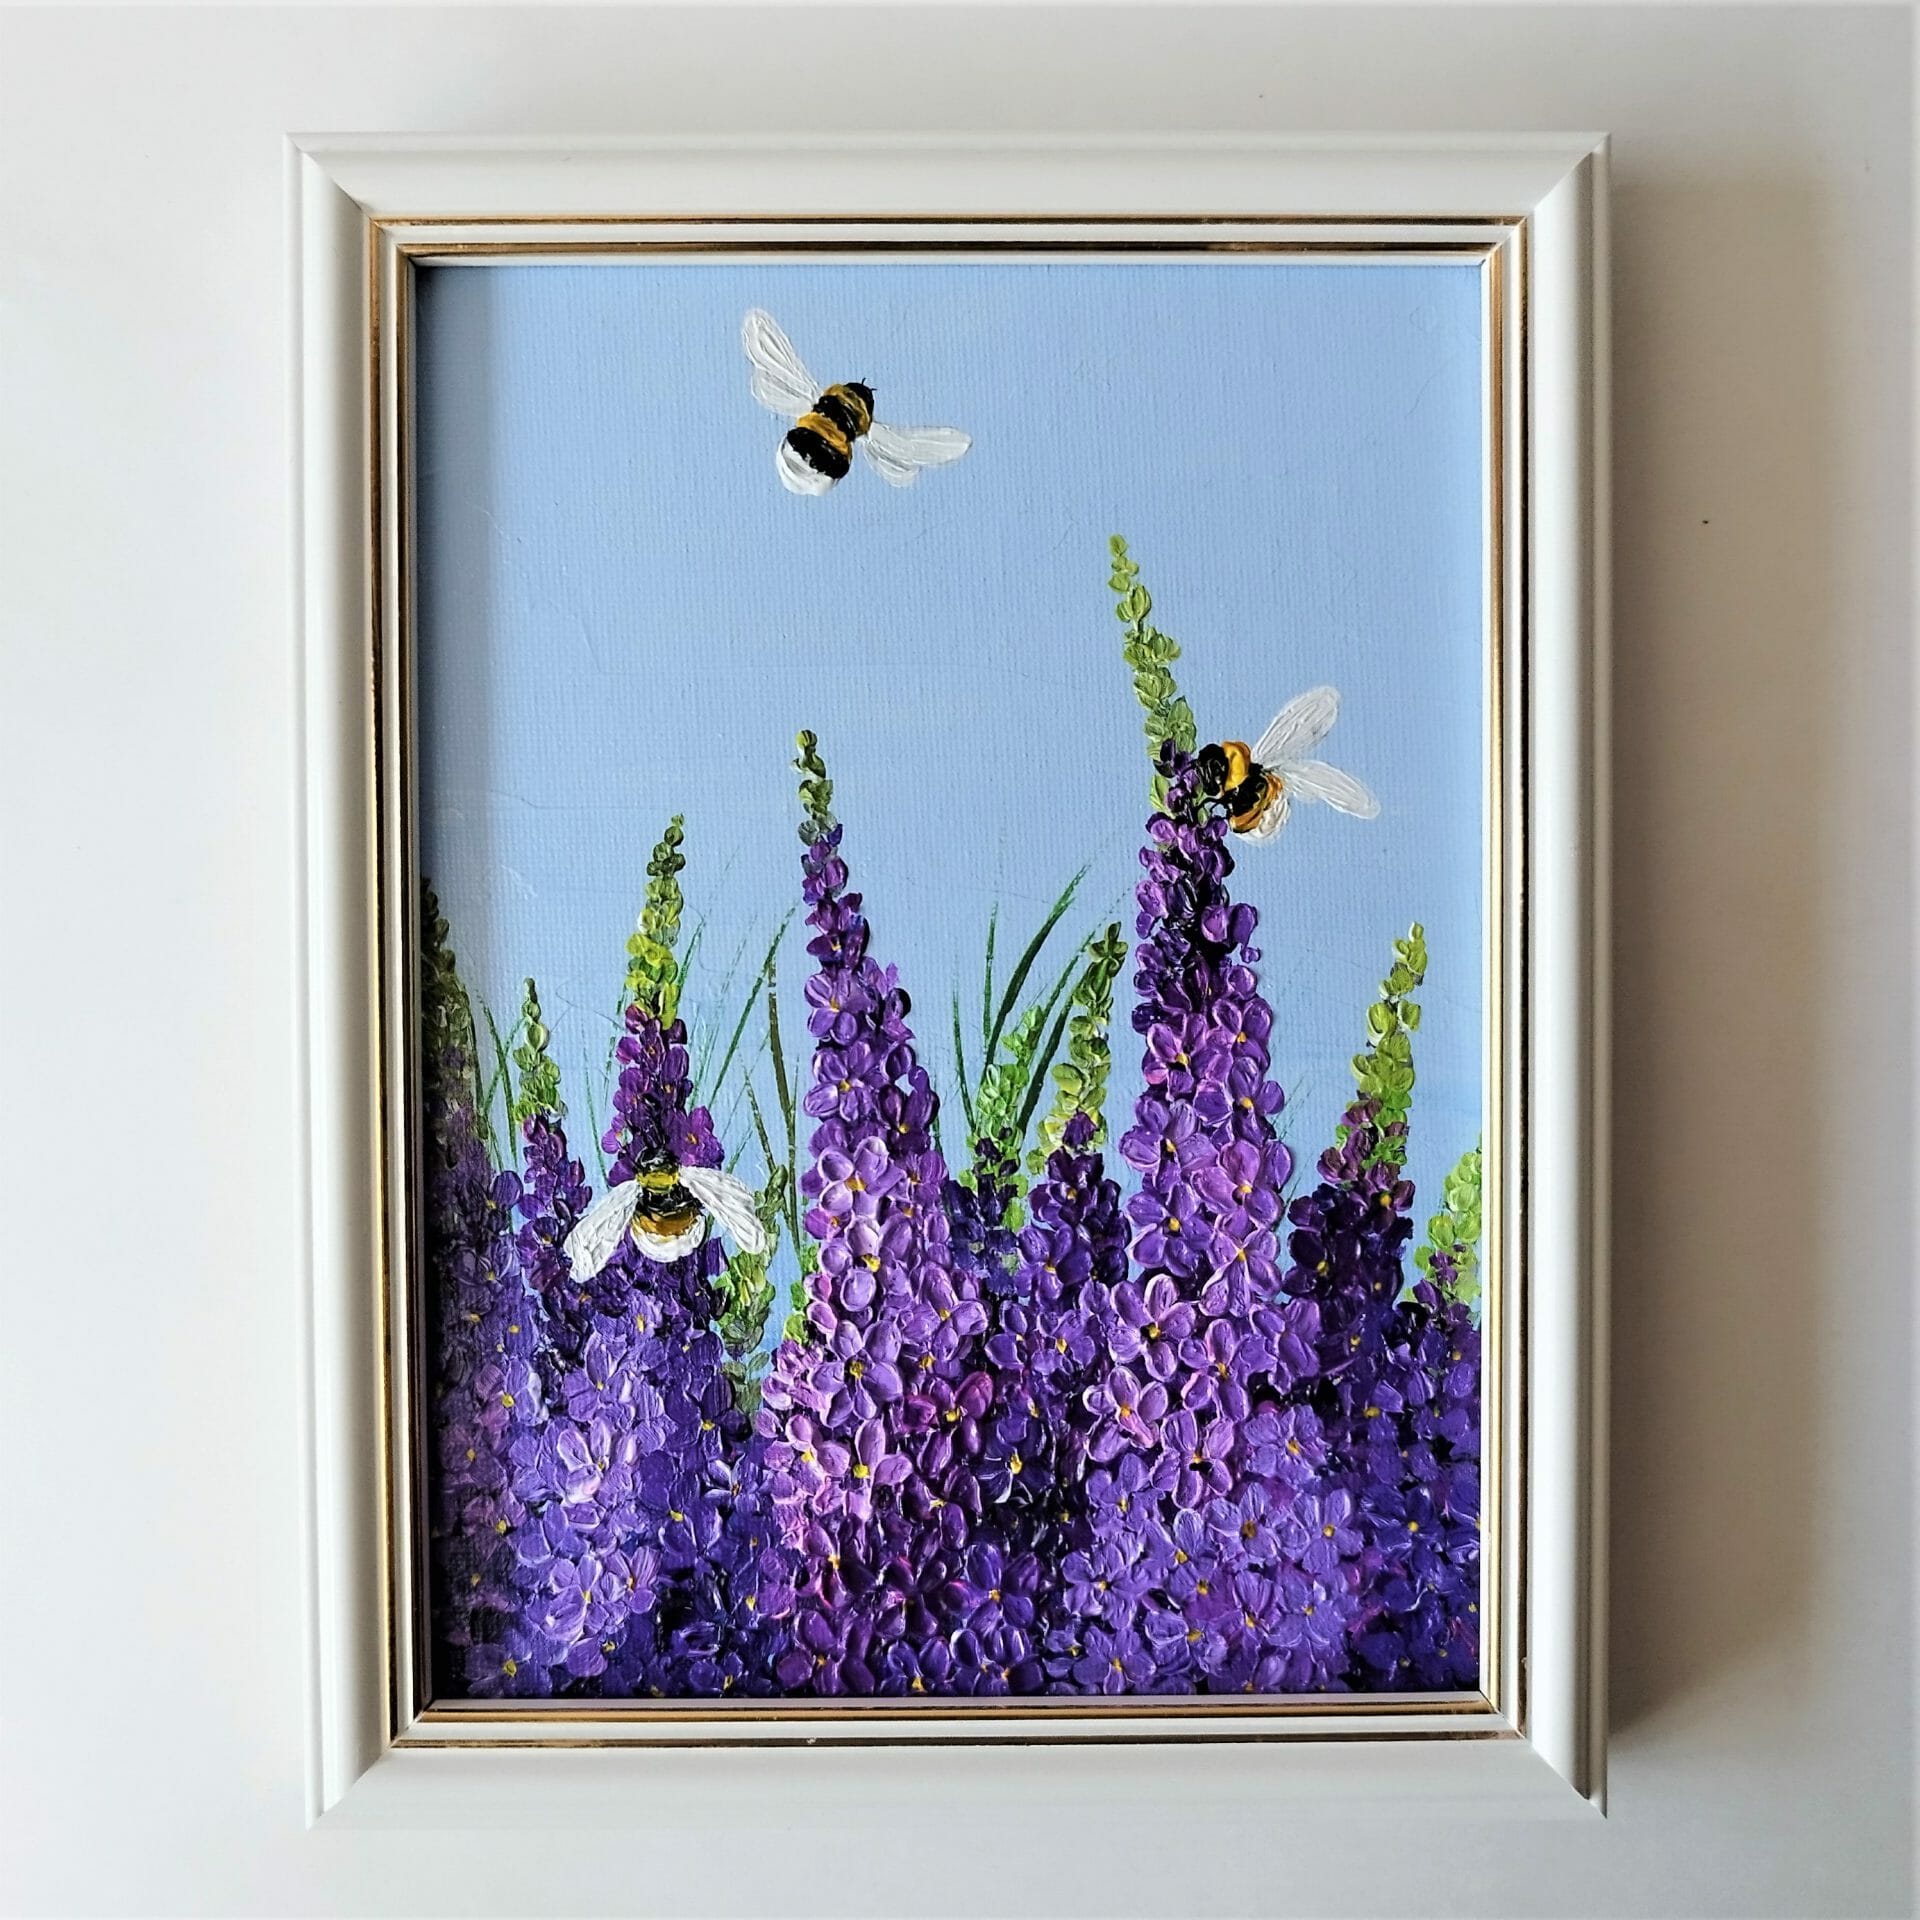 bumblebee on a flower textured painting wall decor floral art